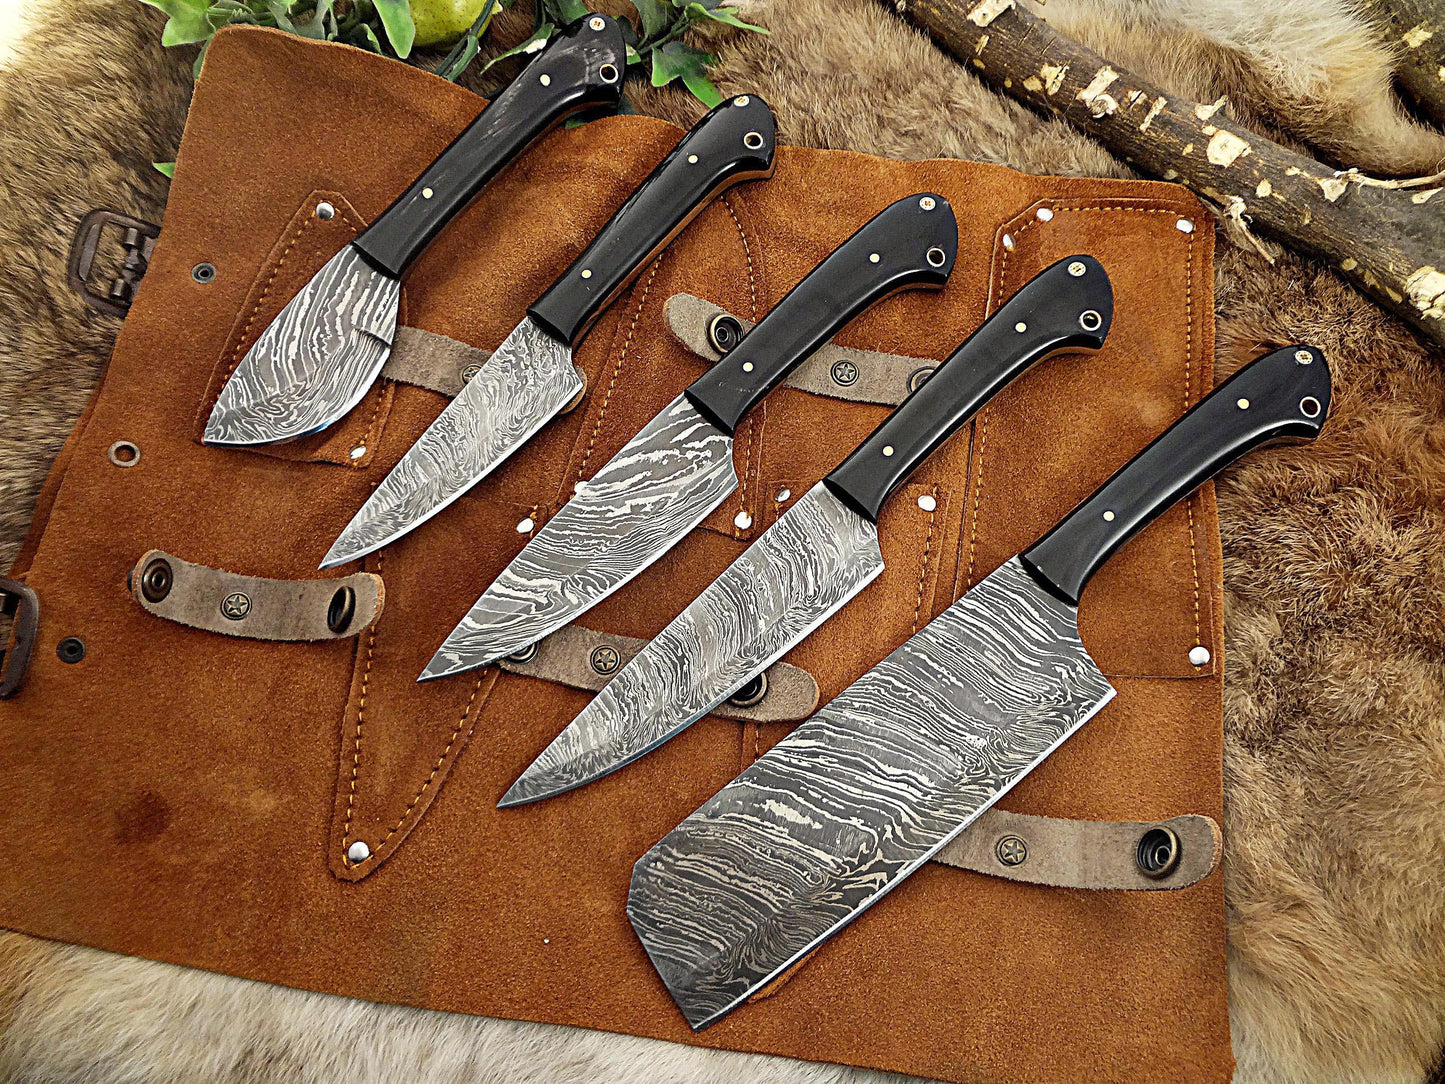 5 Pieces Damascus steel kitchen knife set includes (10.6+9.6+9.0+8.0+7.6)Inches knives in Black Bull horn scale, includes Leather sheath